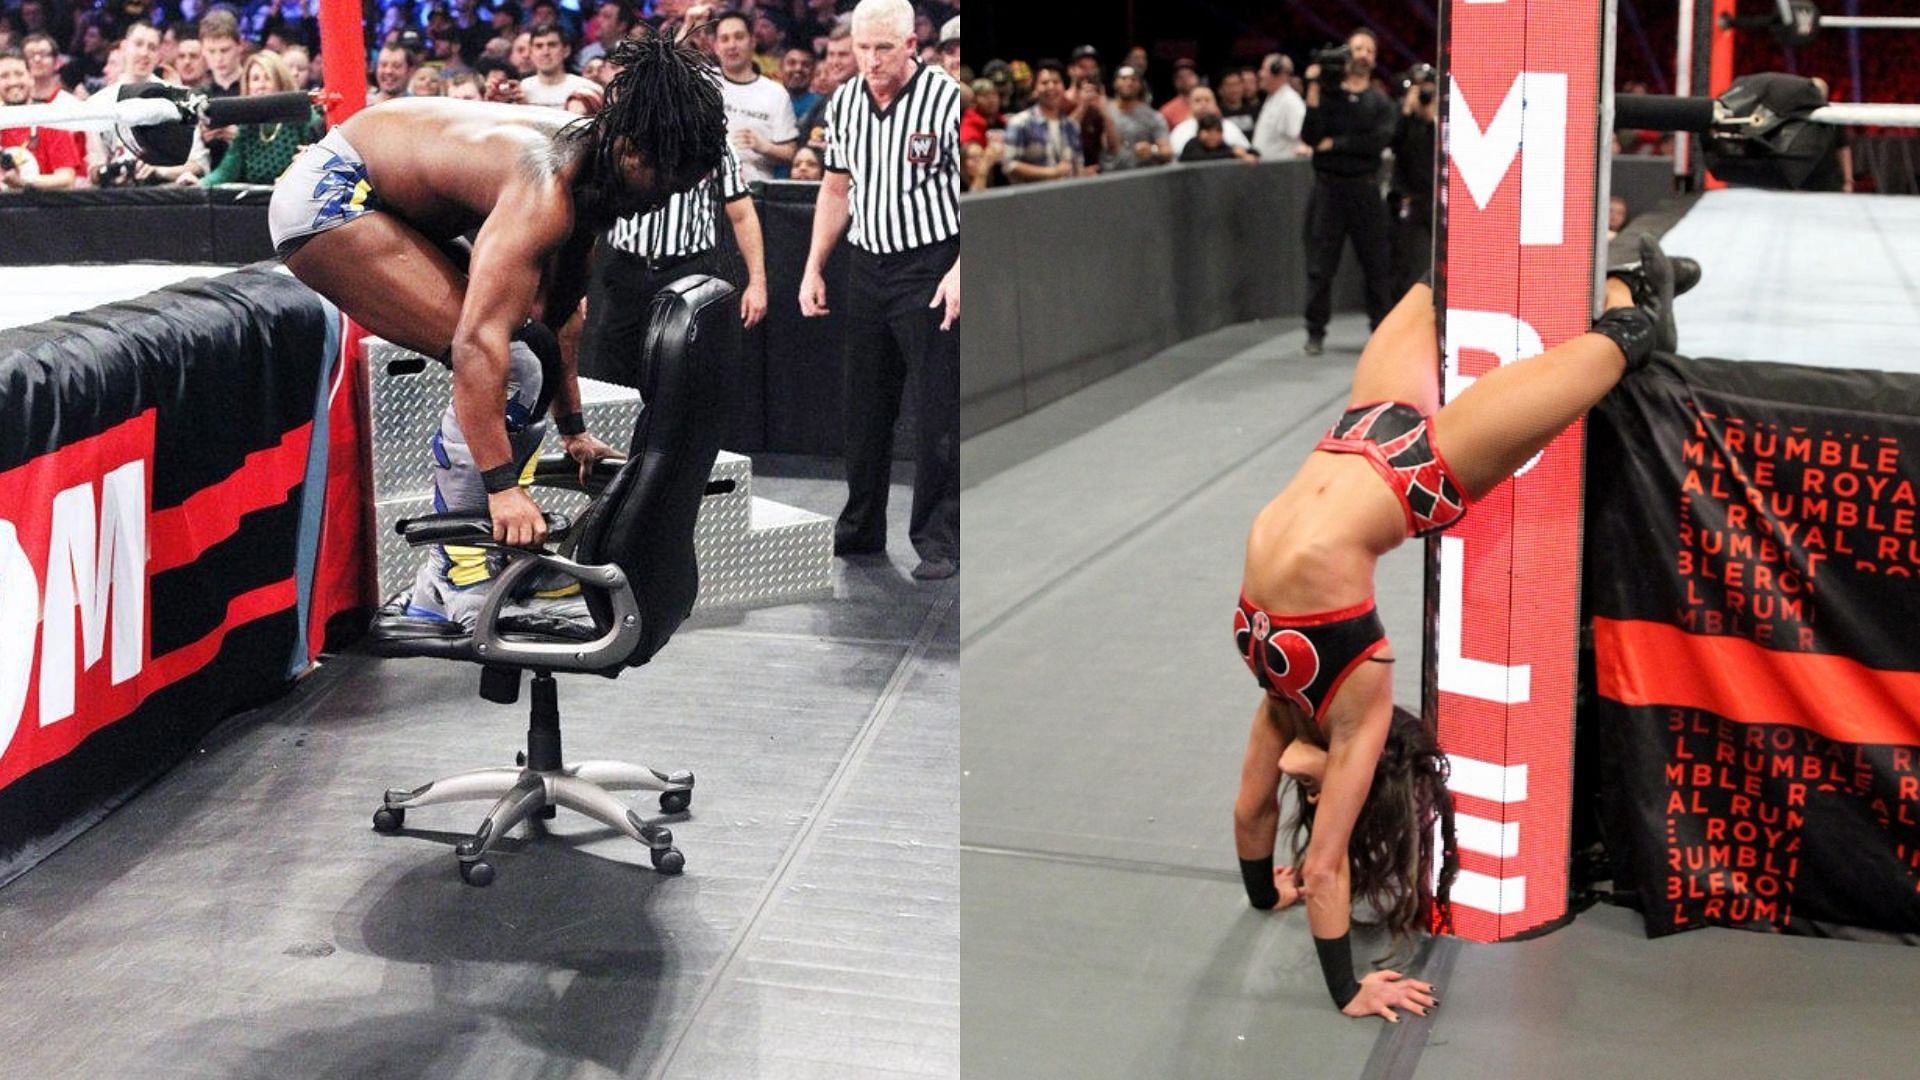 Kofi Kingston (Left) and Katana Chase (Right) in action during Royal Rumble Match